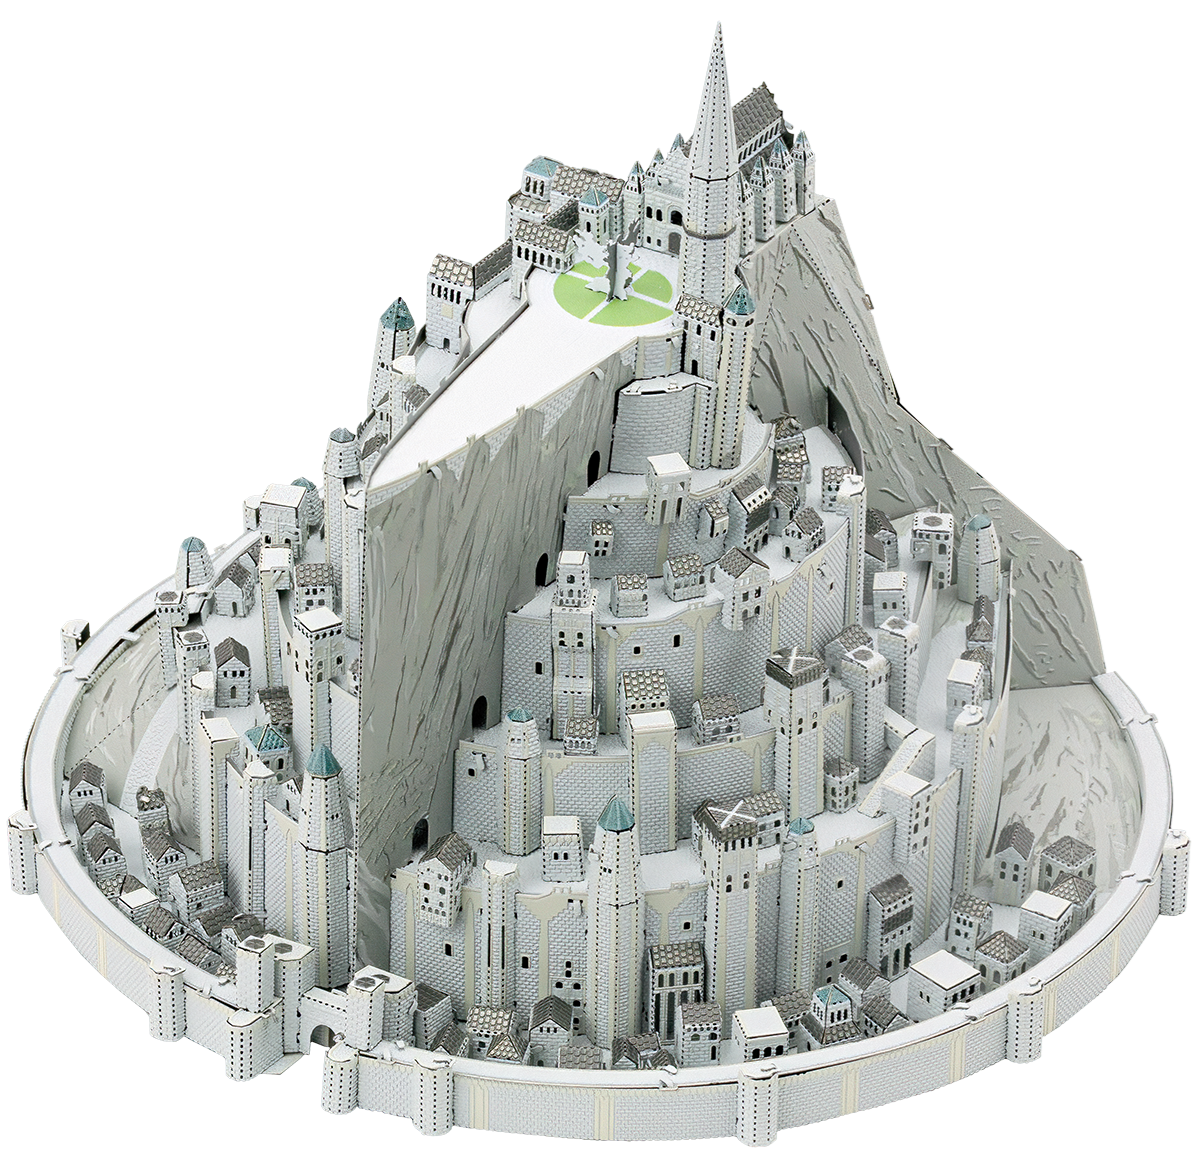 Lord of The Rings - Minas Tirith (First Large Build)